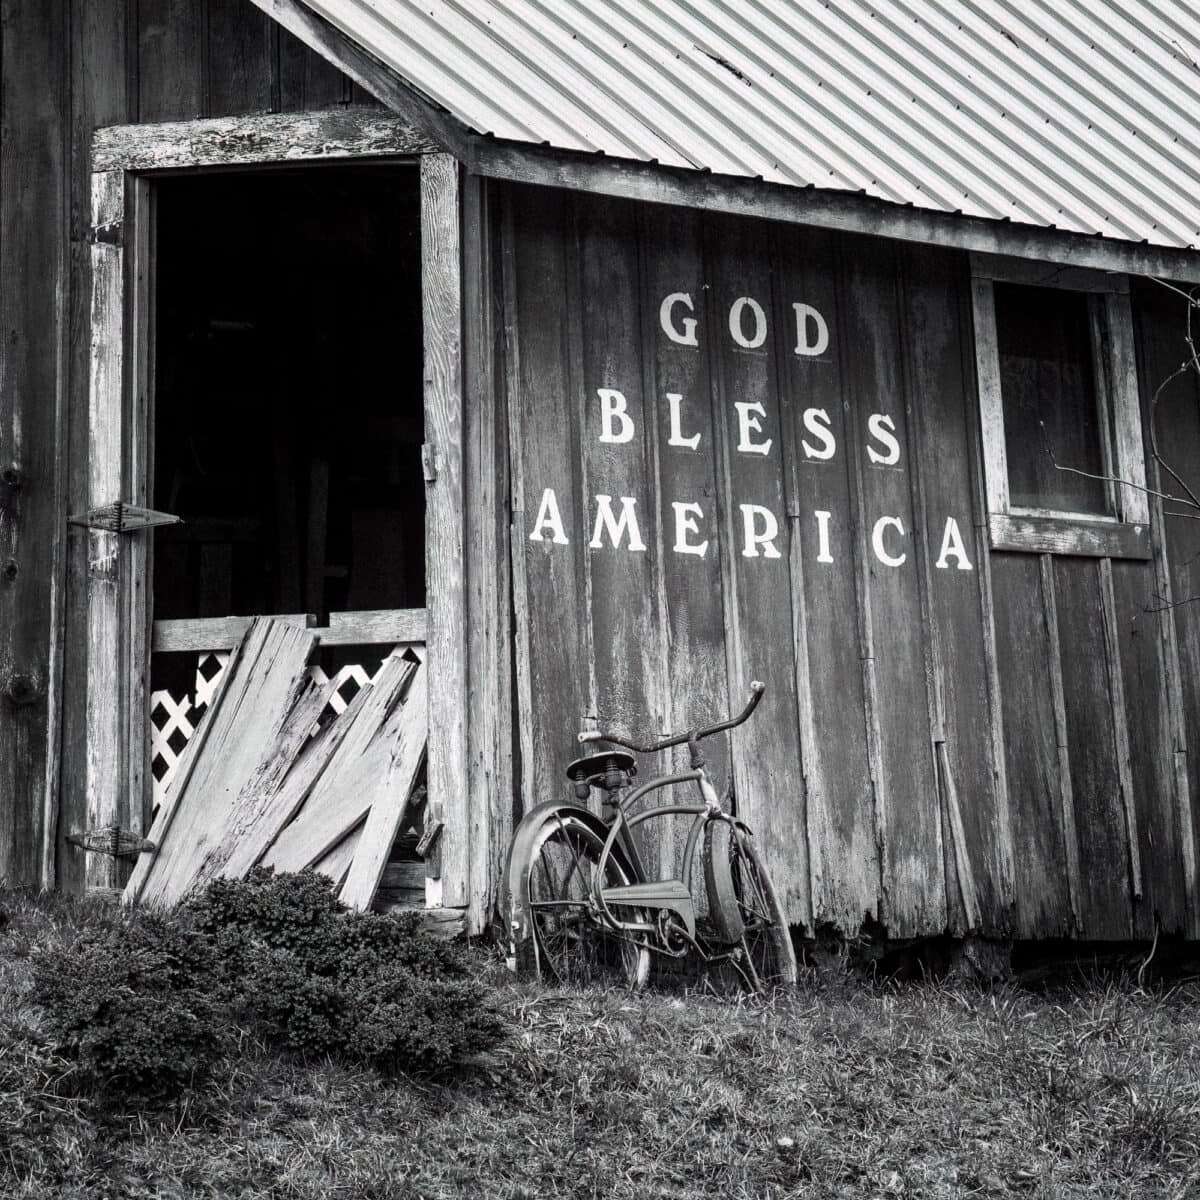 A close-up black and white photograph of an old barn and bicycle in rural Grays Harbor County, Washington.